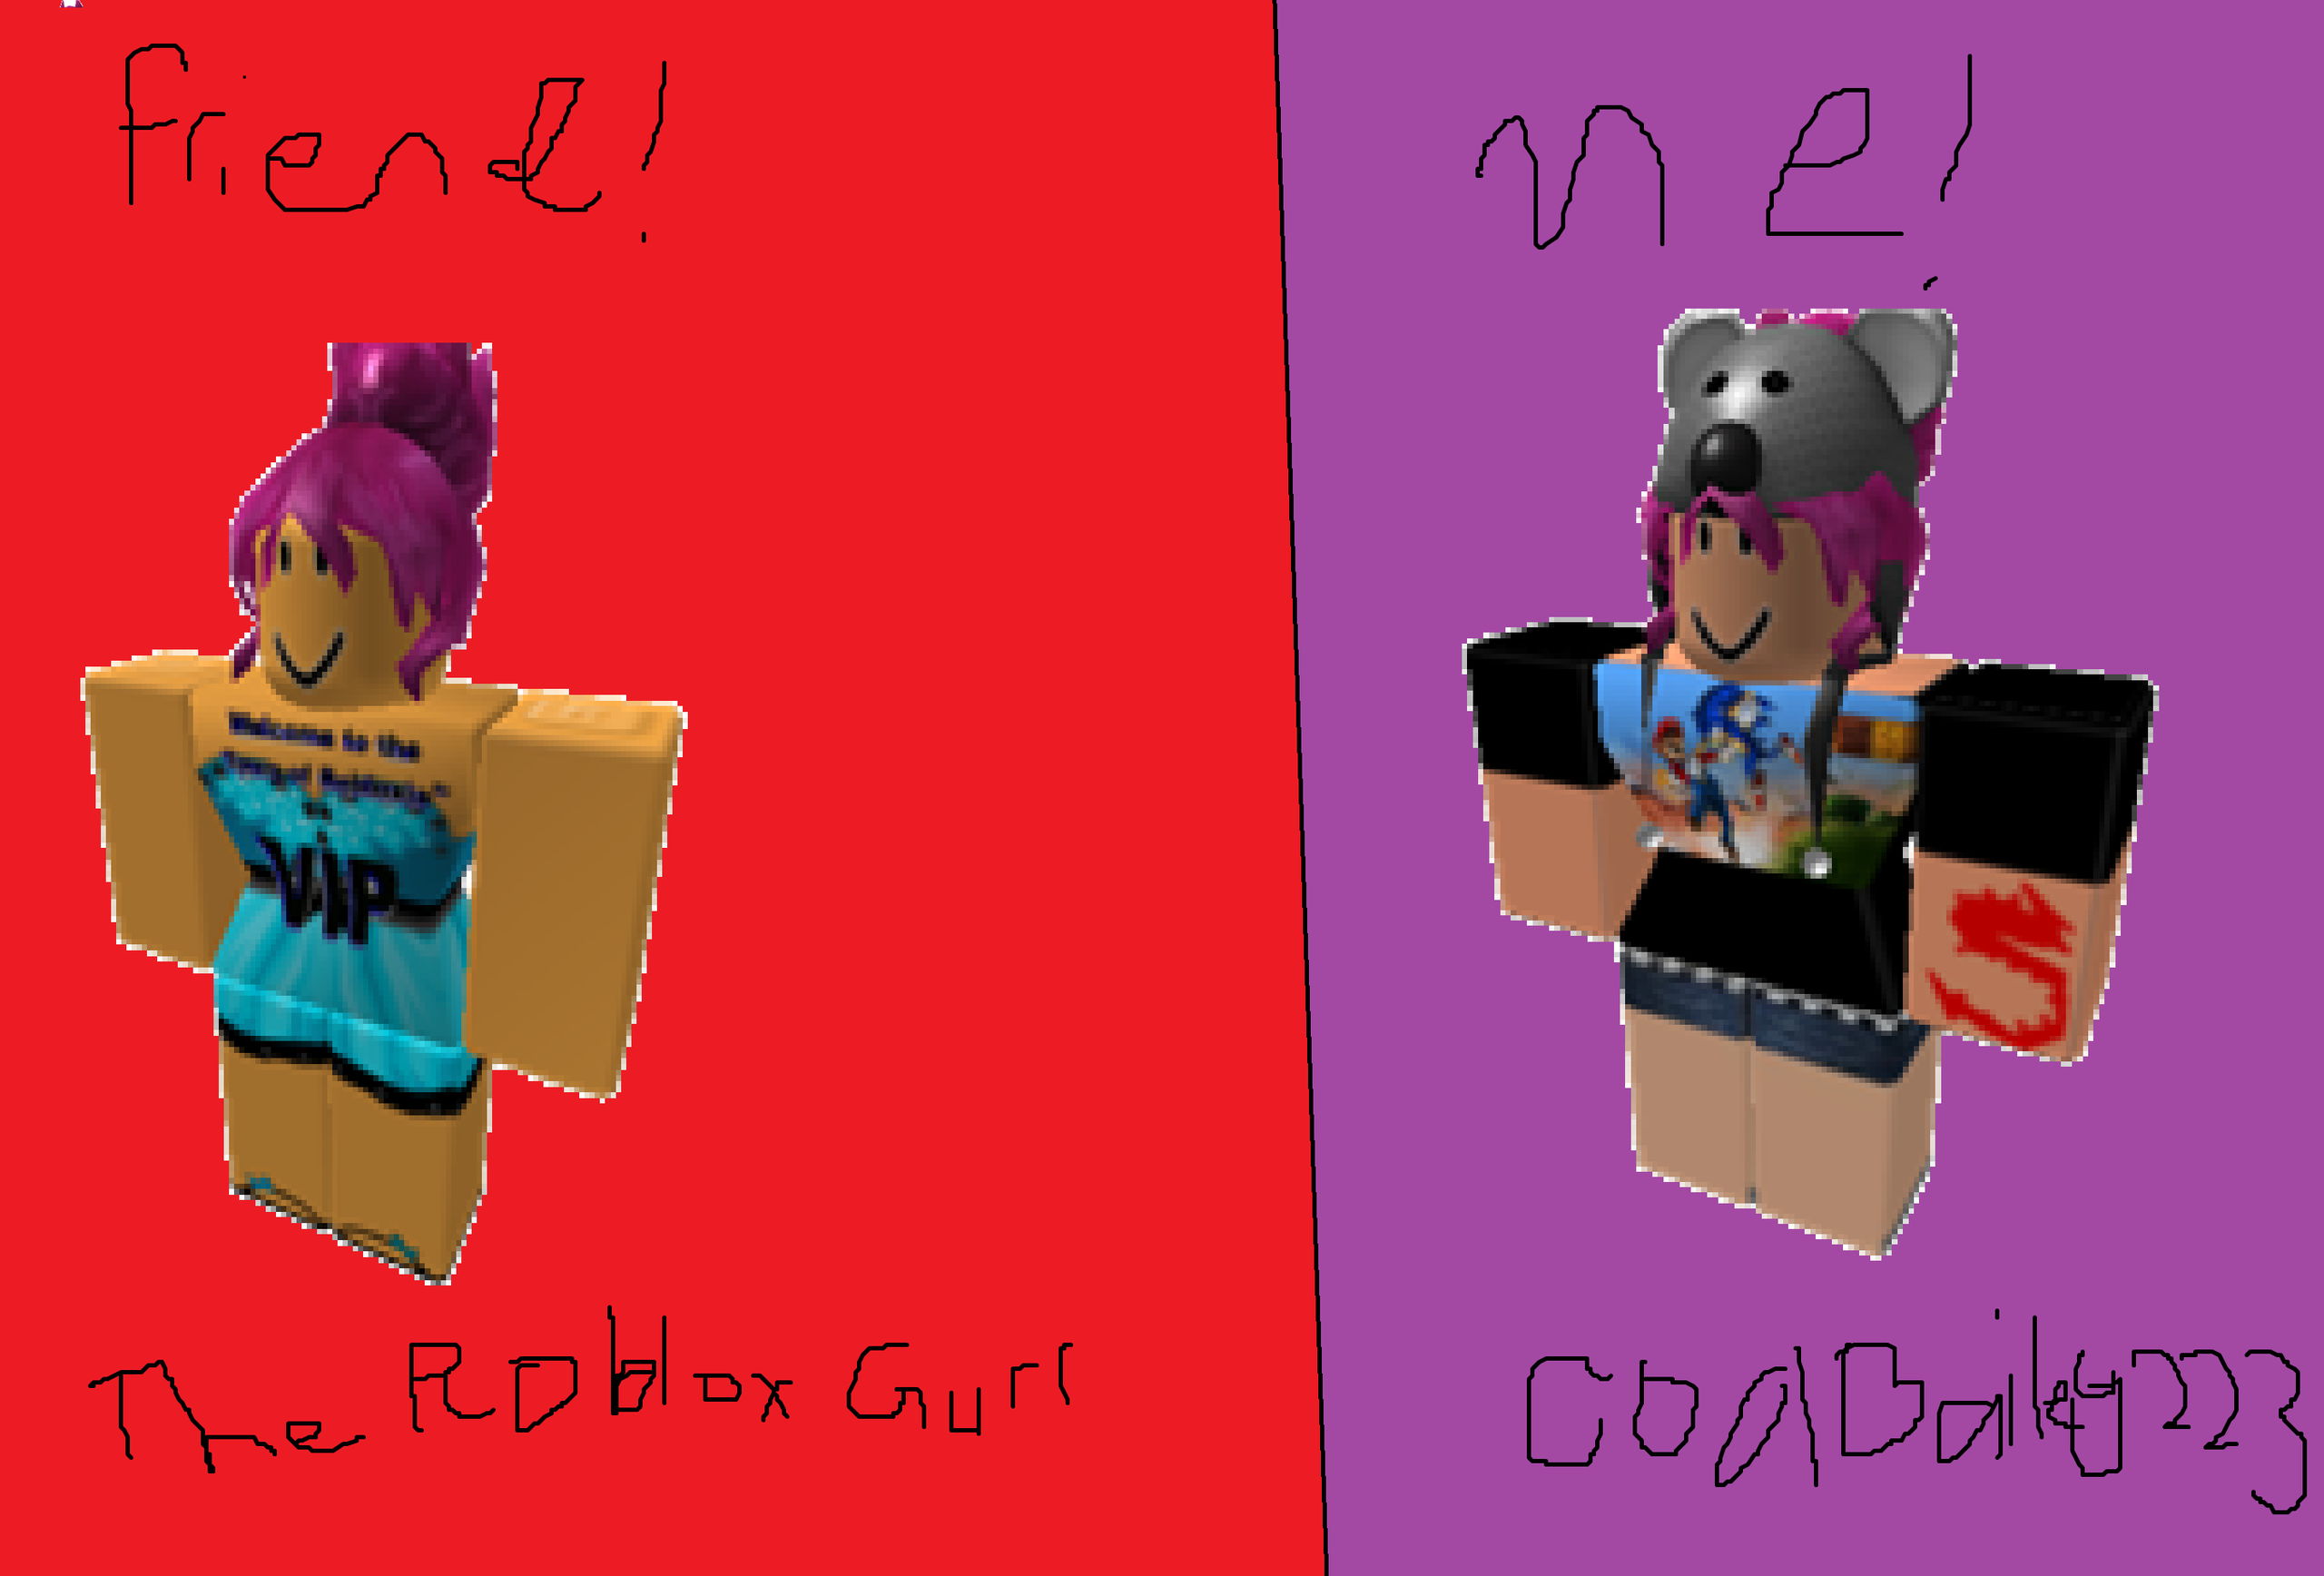 Free Download Roblox Images Coolbailey223 And The Robloxgurl Hd